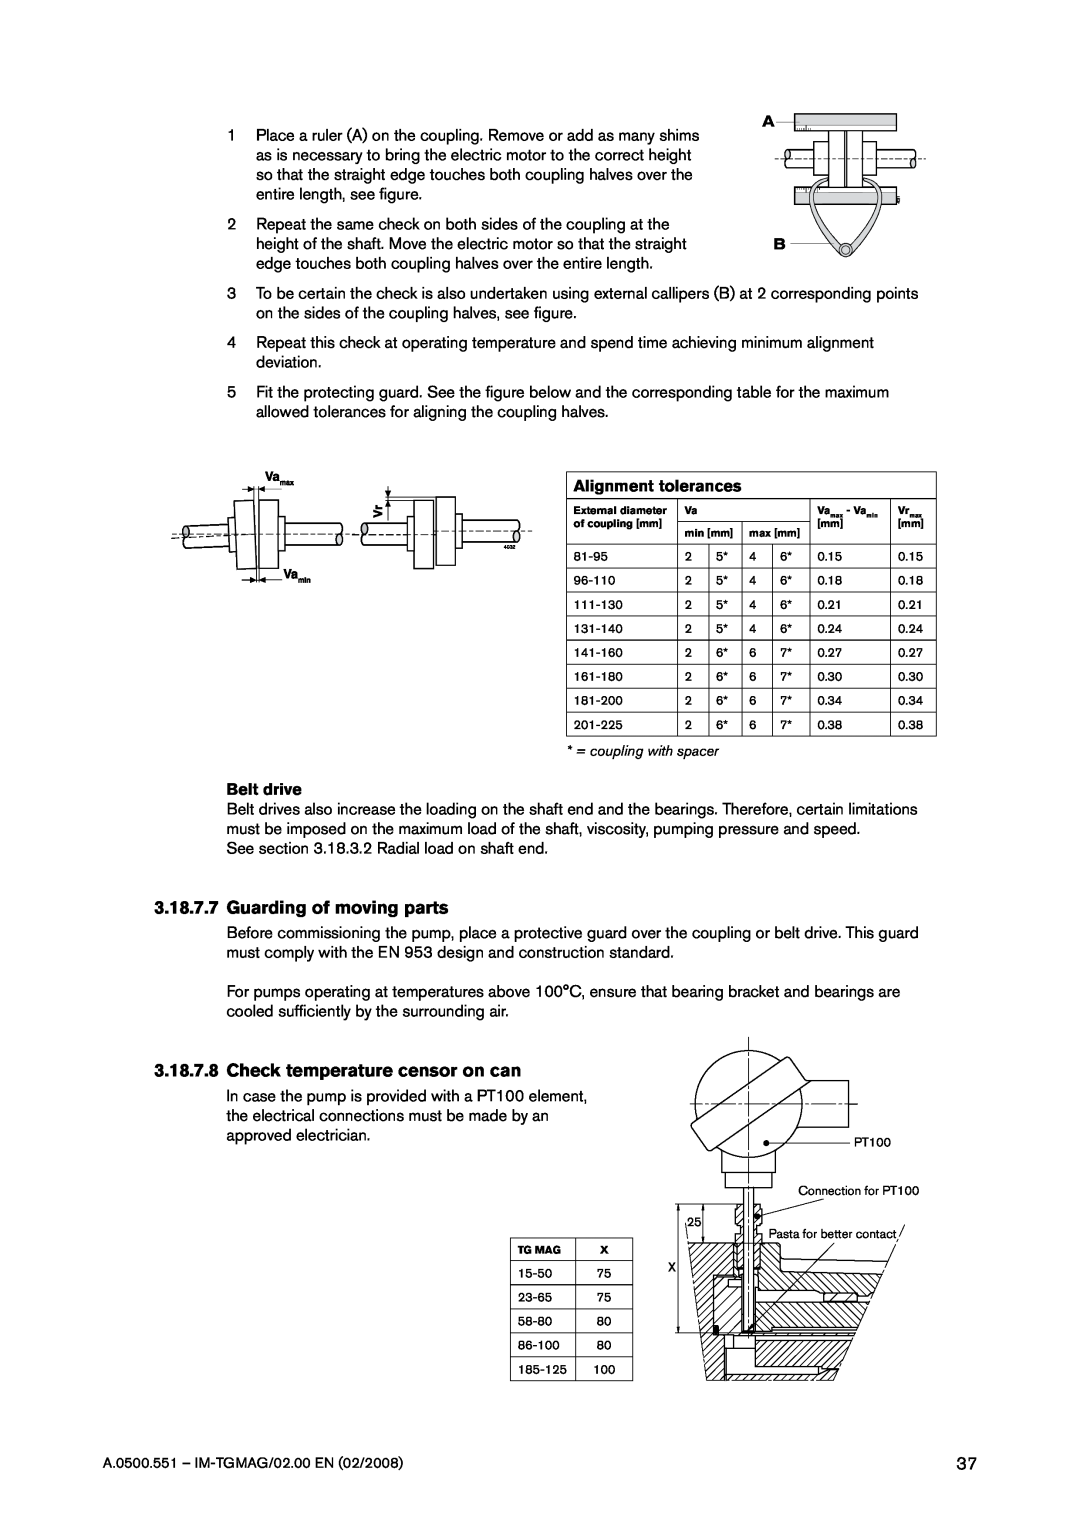 SPX Cooling Technologies TG MAG58-80 3.18.7.7Guarding of moving parts, 3.18.7.8Check temperature censor on can, Belt drive 